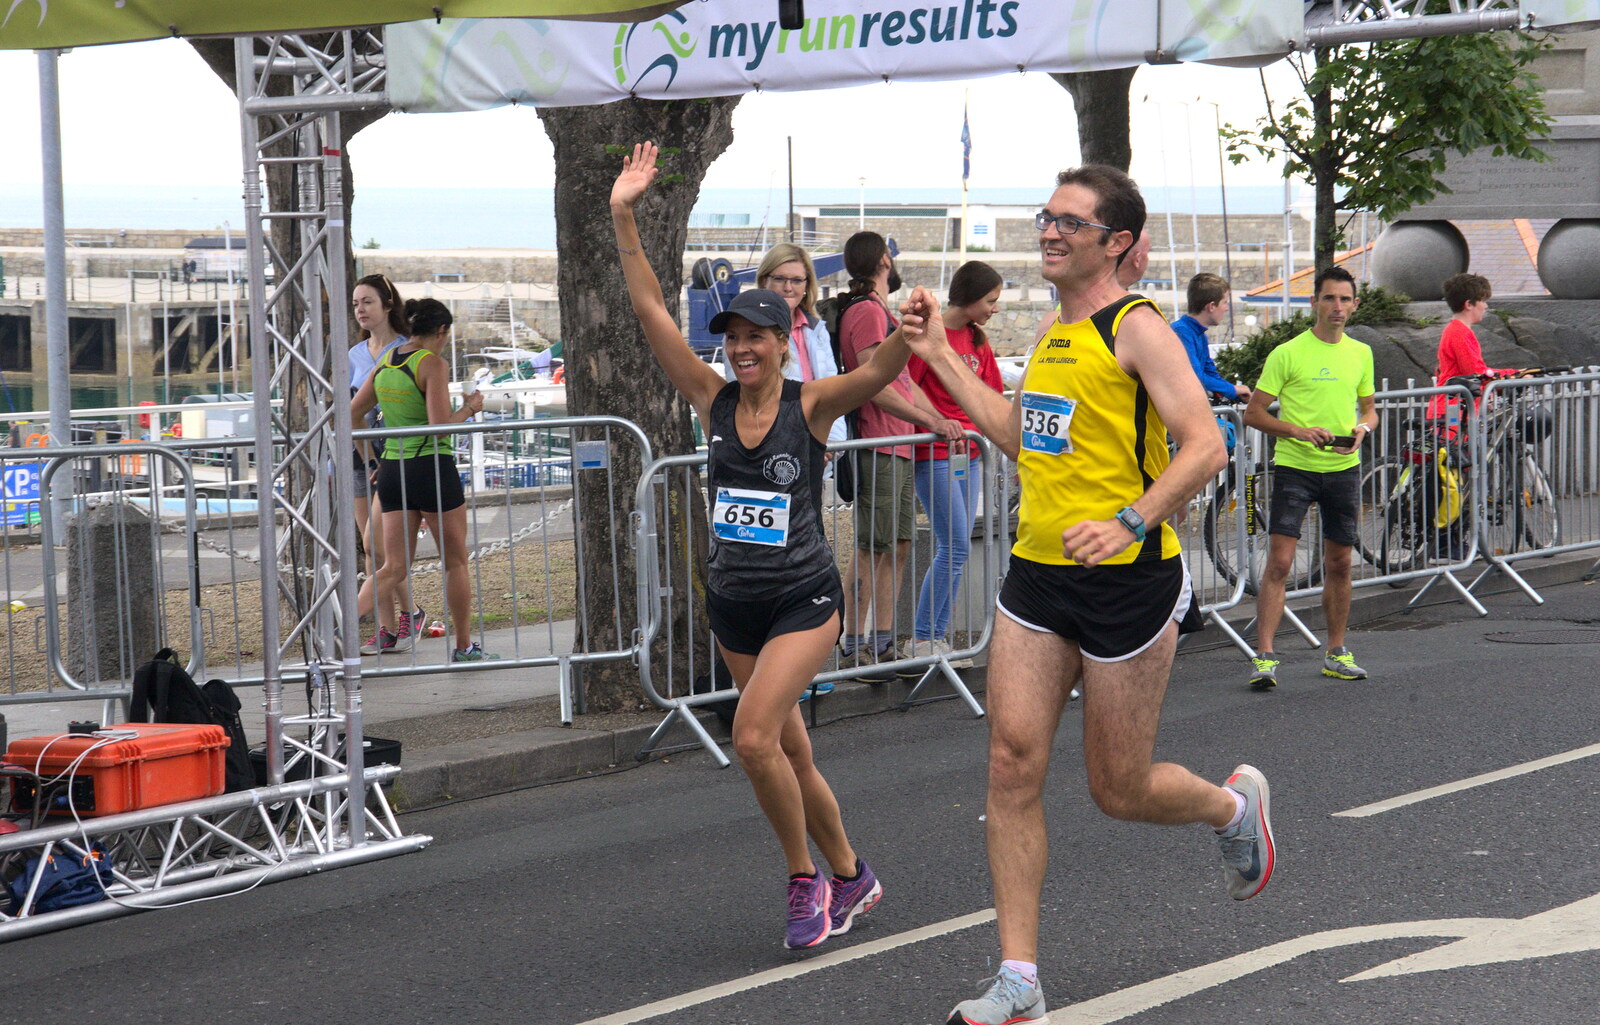 The jubilation of finishing from The Dún Laoghaire 10k Run, County Dublin, Ireland - 6th August 2018